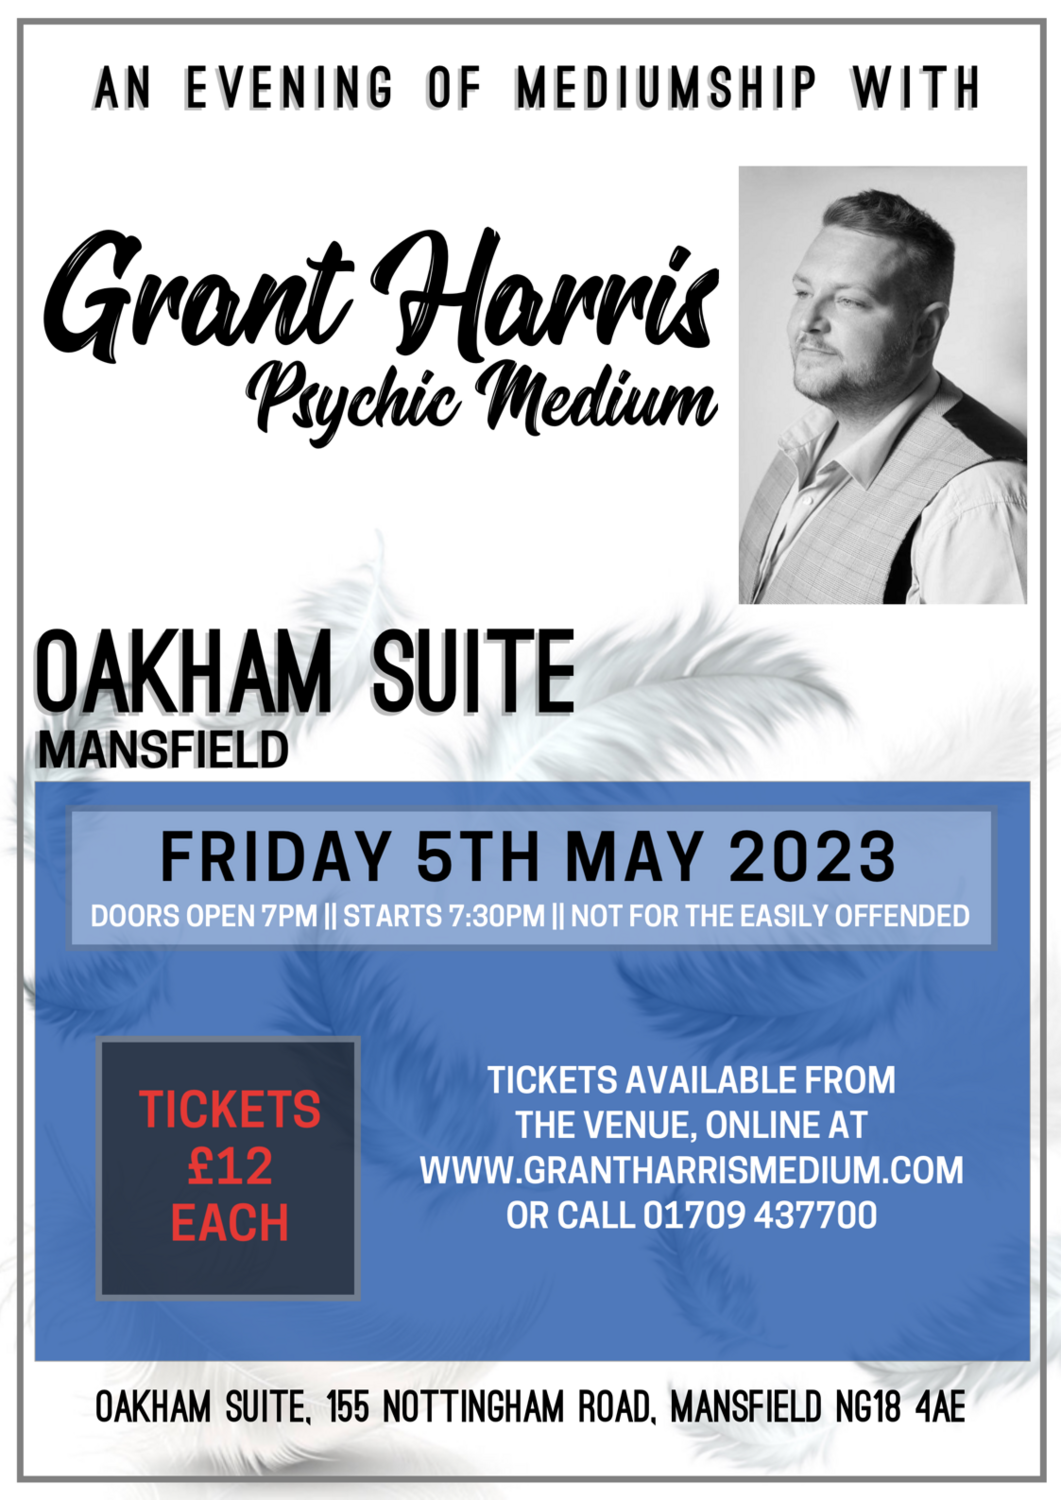 Oakham Suite, Mansfield, Friday 5th May 2023